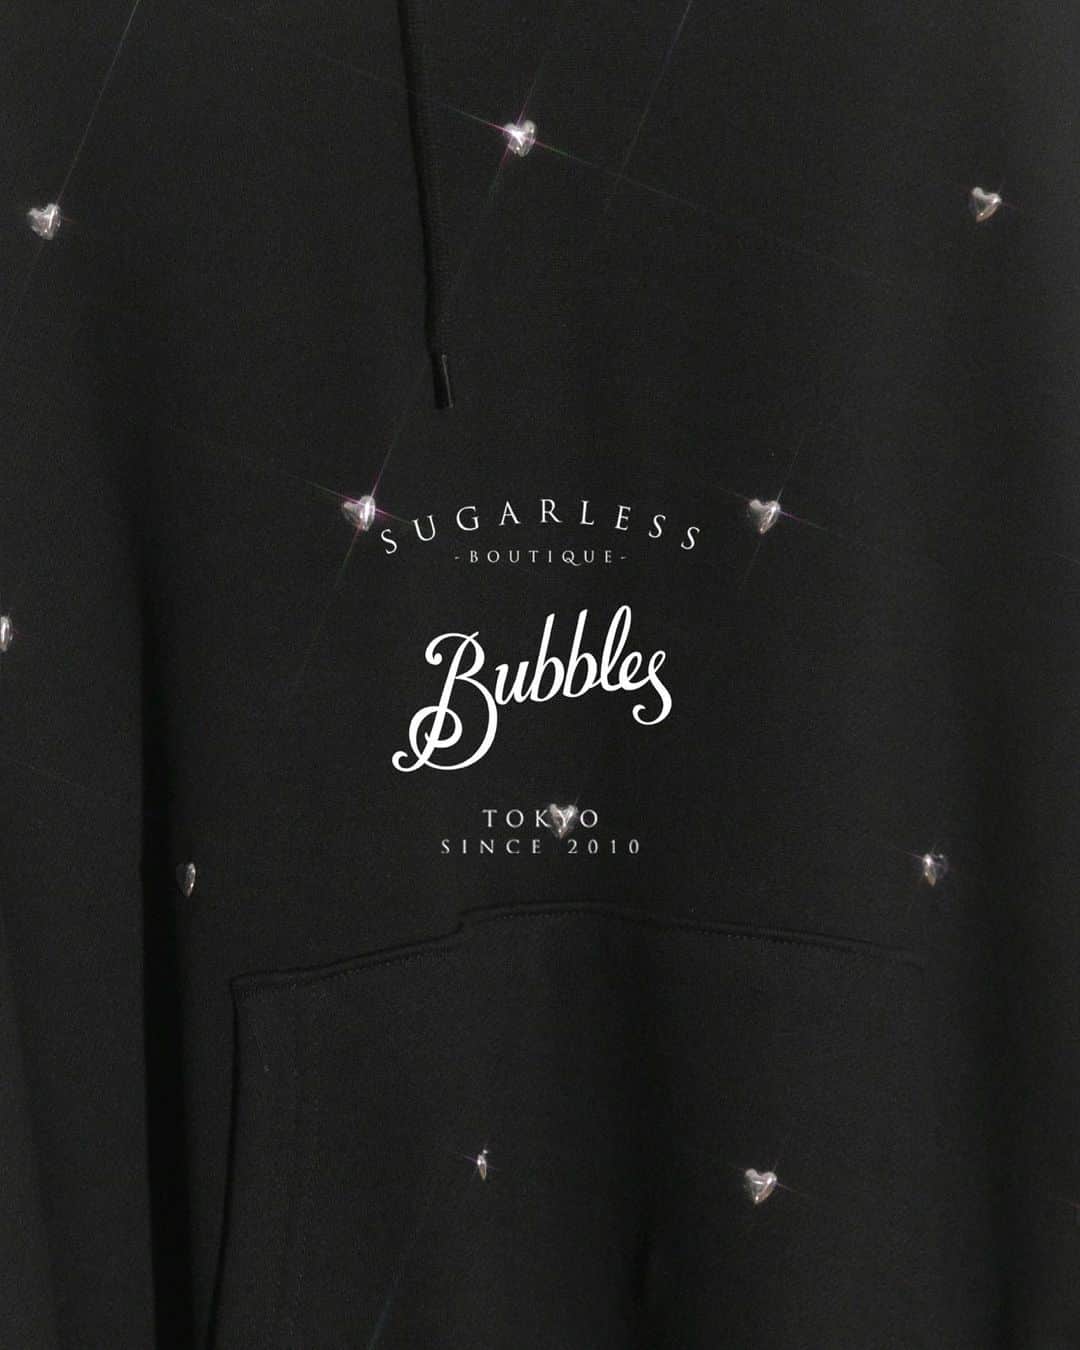 BUBBLESのインスタグラム：「ㅤㅤㅤㅤㅤㅤㅤㅤㅤㅤㅤㅤㅤ ㅤㅤㅤㅤㅤㅤㅤㅤㅤㅤㅤㅤㅤ BUBBLES Autumn / October,2023  https://www.sparklingmall.jp/c/bubbles/bubbles_all/bubbles_newarrival ㅤㅤㅤㅤㅤㅤㅤㅤㅤㅤㅤ _____________________________________________  #bubbles #bubblestokyo  #bubbles_shibuya #bubbles_shinjuku #bubblessawthecity #bubbles #new #clothing #fashion #style #styleinspo #girly #classicalgirly #brushgirly #harajuku #shibuya #newarrival #october #aw #autumn #fall #2023_BUBBLES #October2023_BUBBLES」